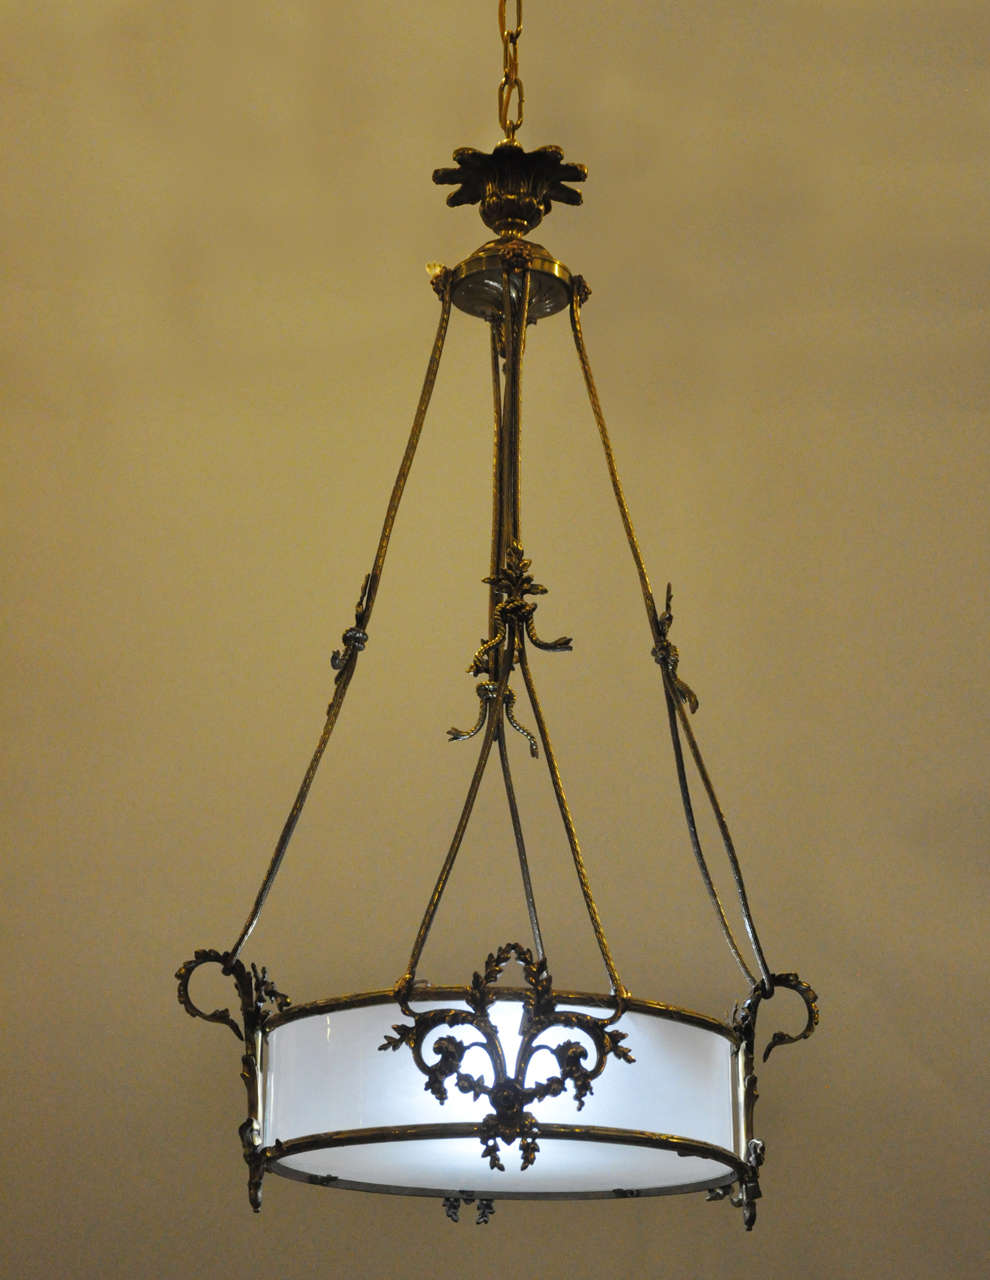 French Louis XVI style bronze and brass pendant chandelier, circular frosted glass shade adorned with bronze neoclassical motifs, supported by brass and bronze suspending supports terminating in a ceiling plate.

Neoclassical design was inspired by